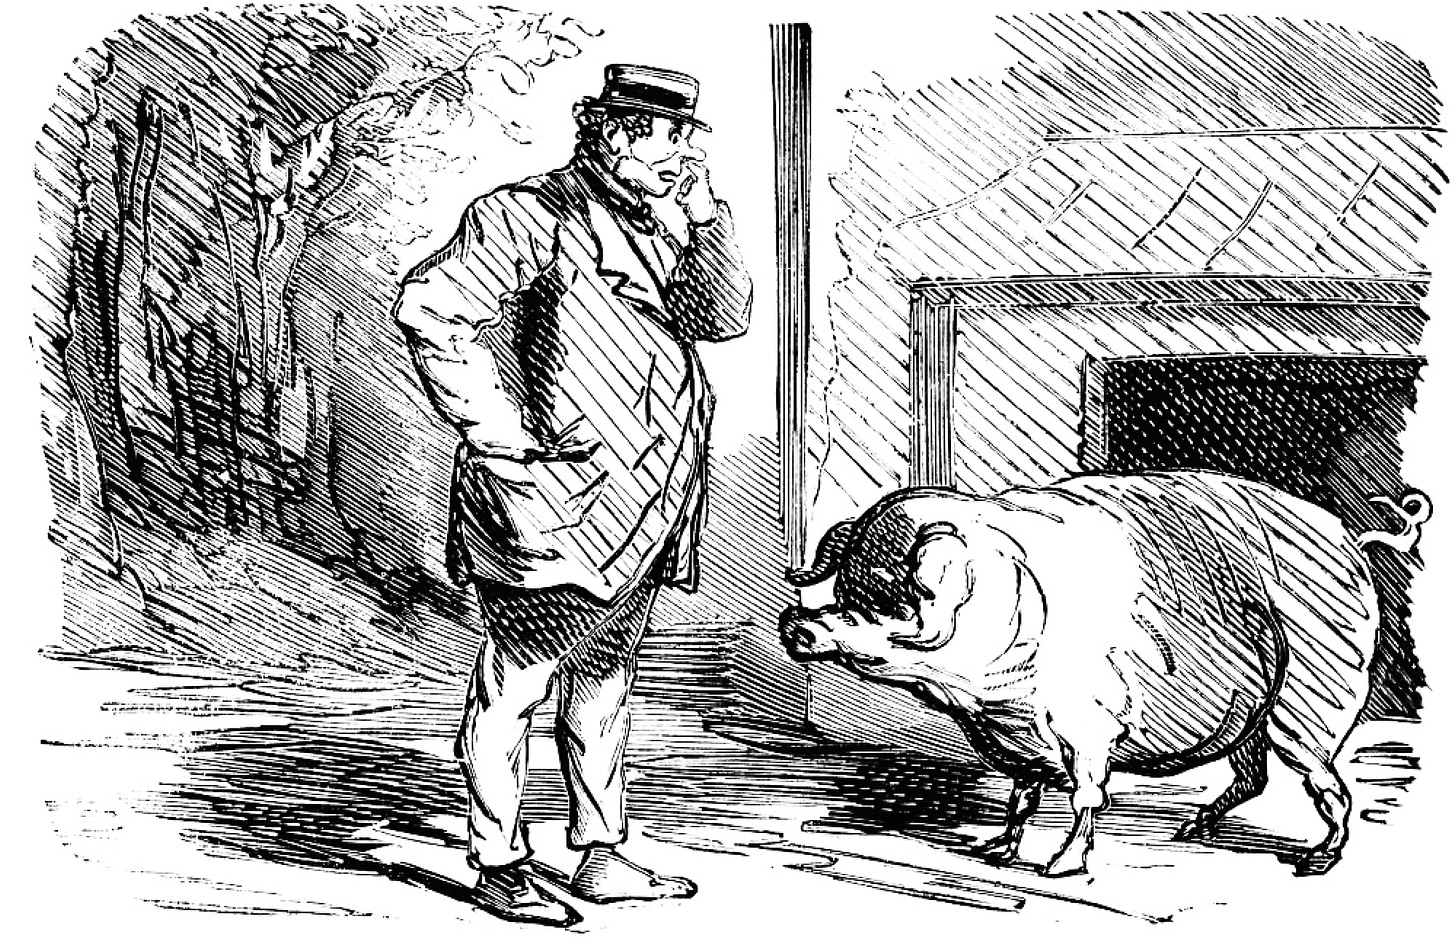 Man picking his nose in front of pig